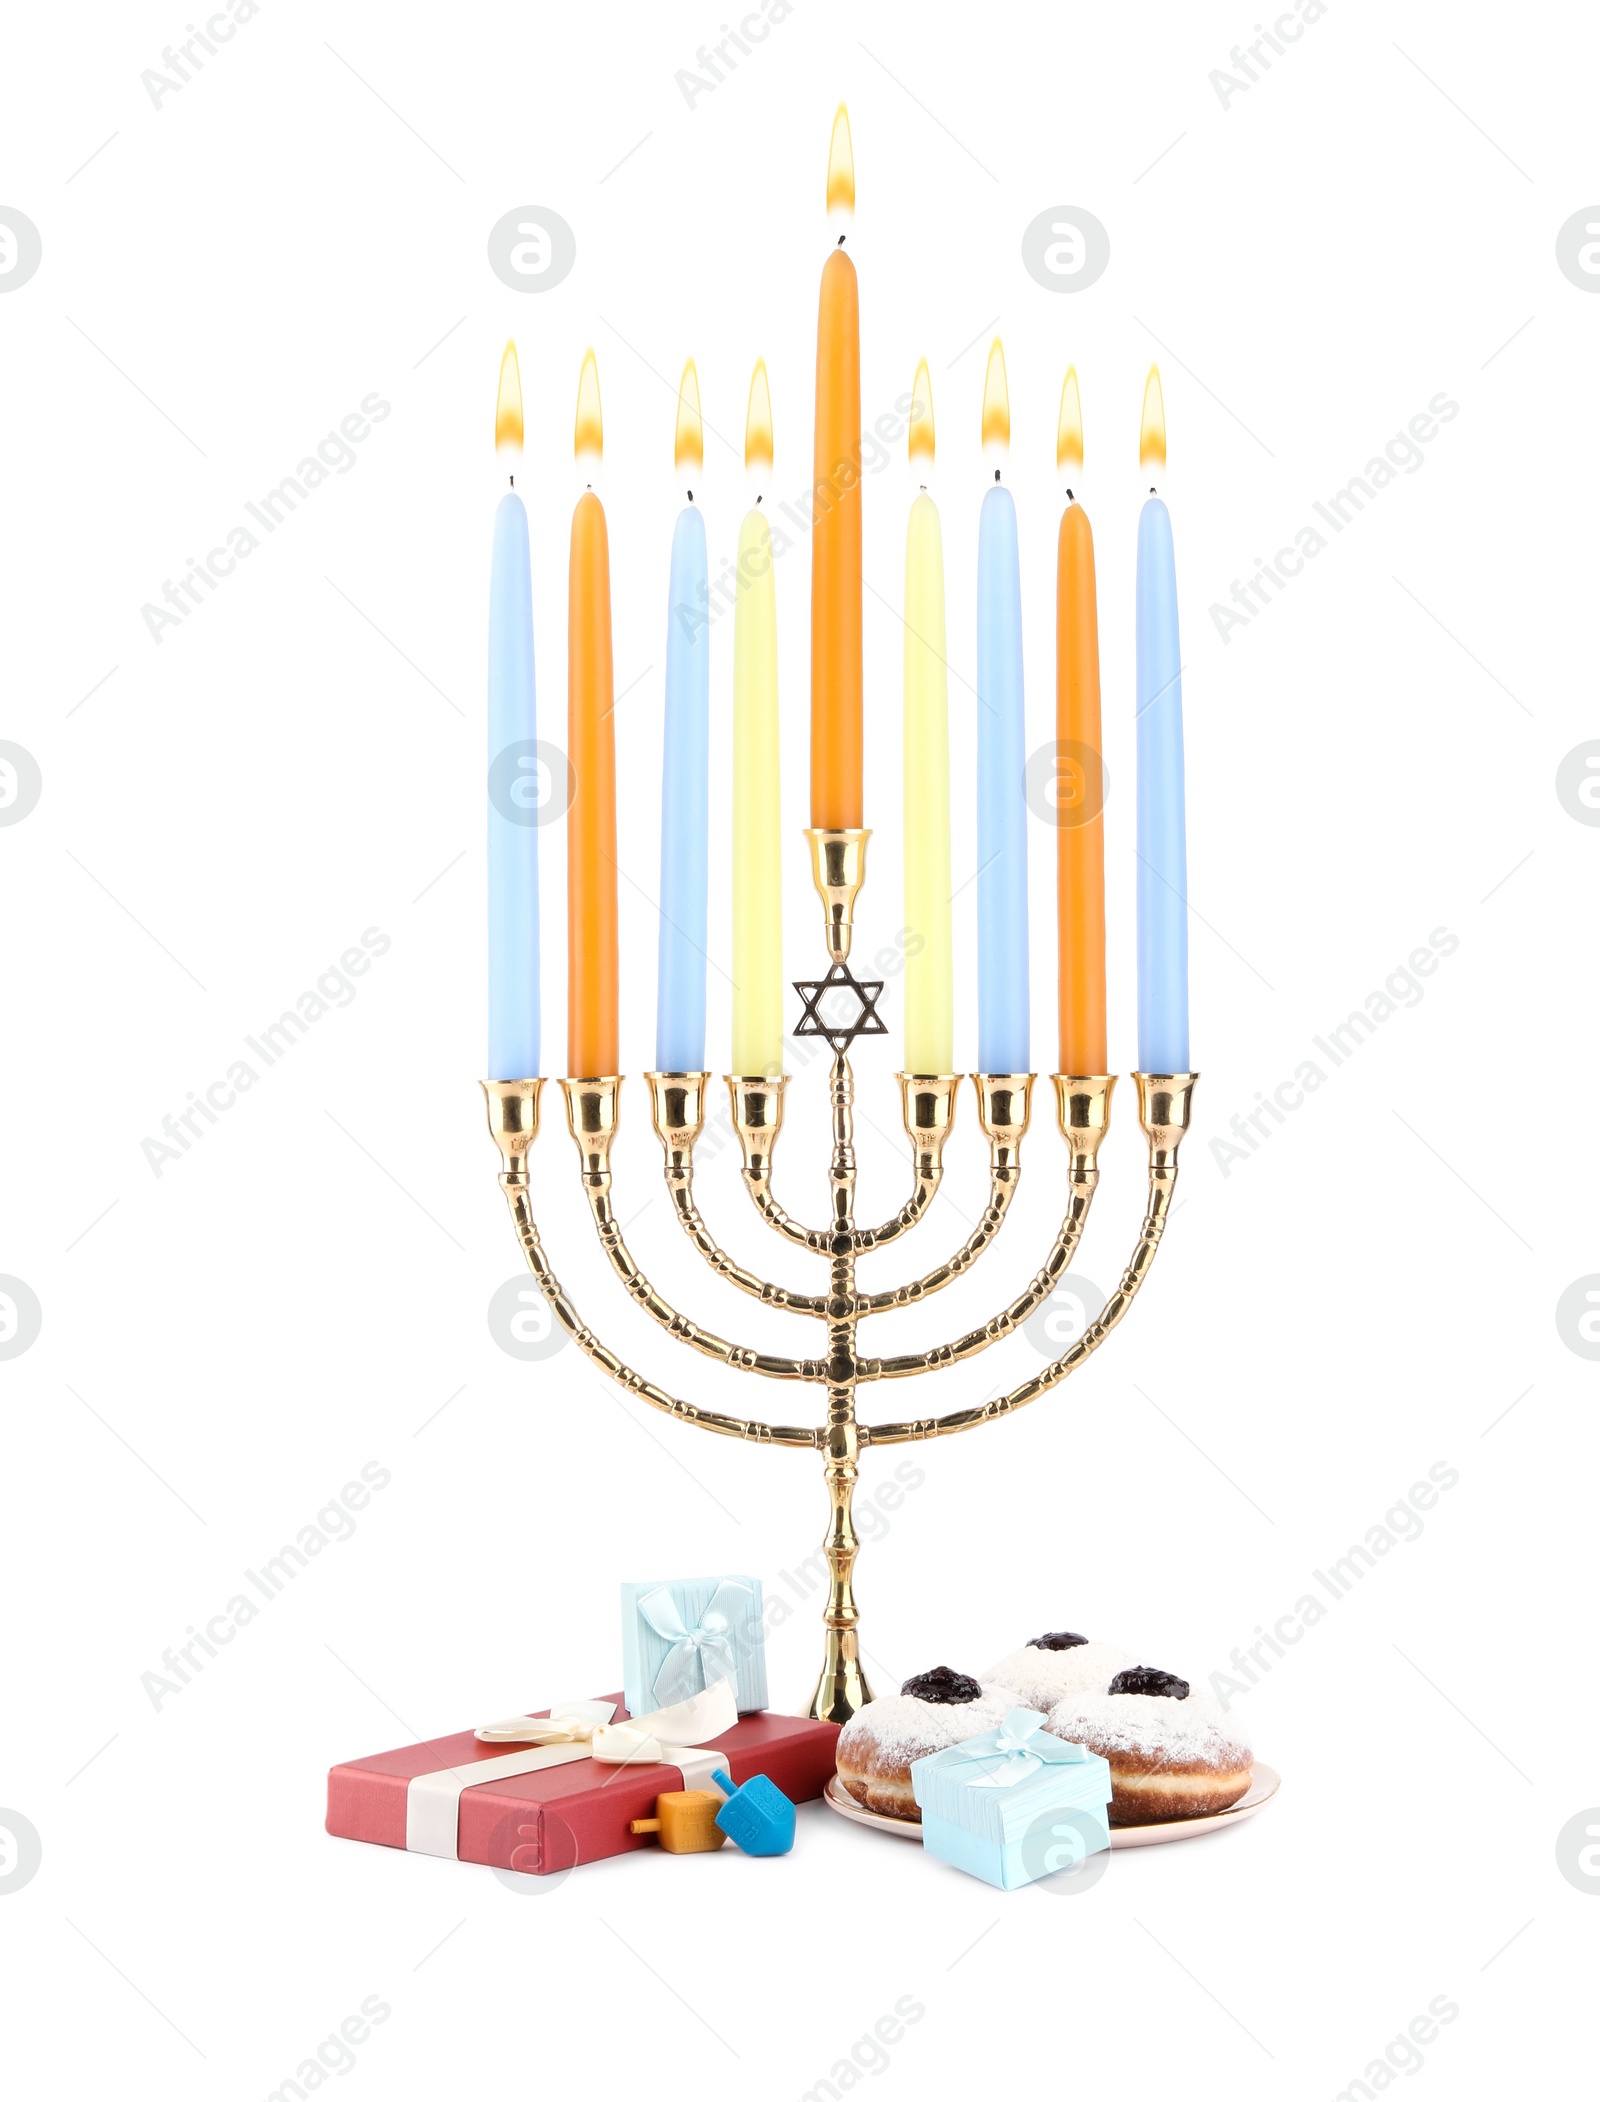 Photo of Hanukkah celebration. Menorah with candles, gift boxes, colorful dreidels and donuts isolated on white